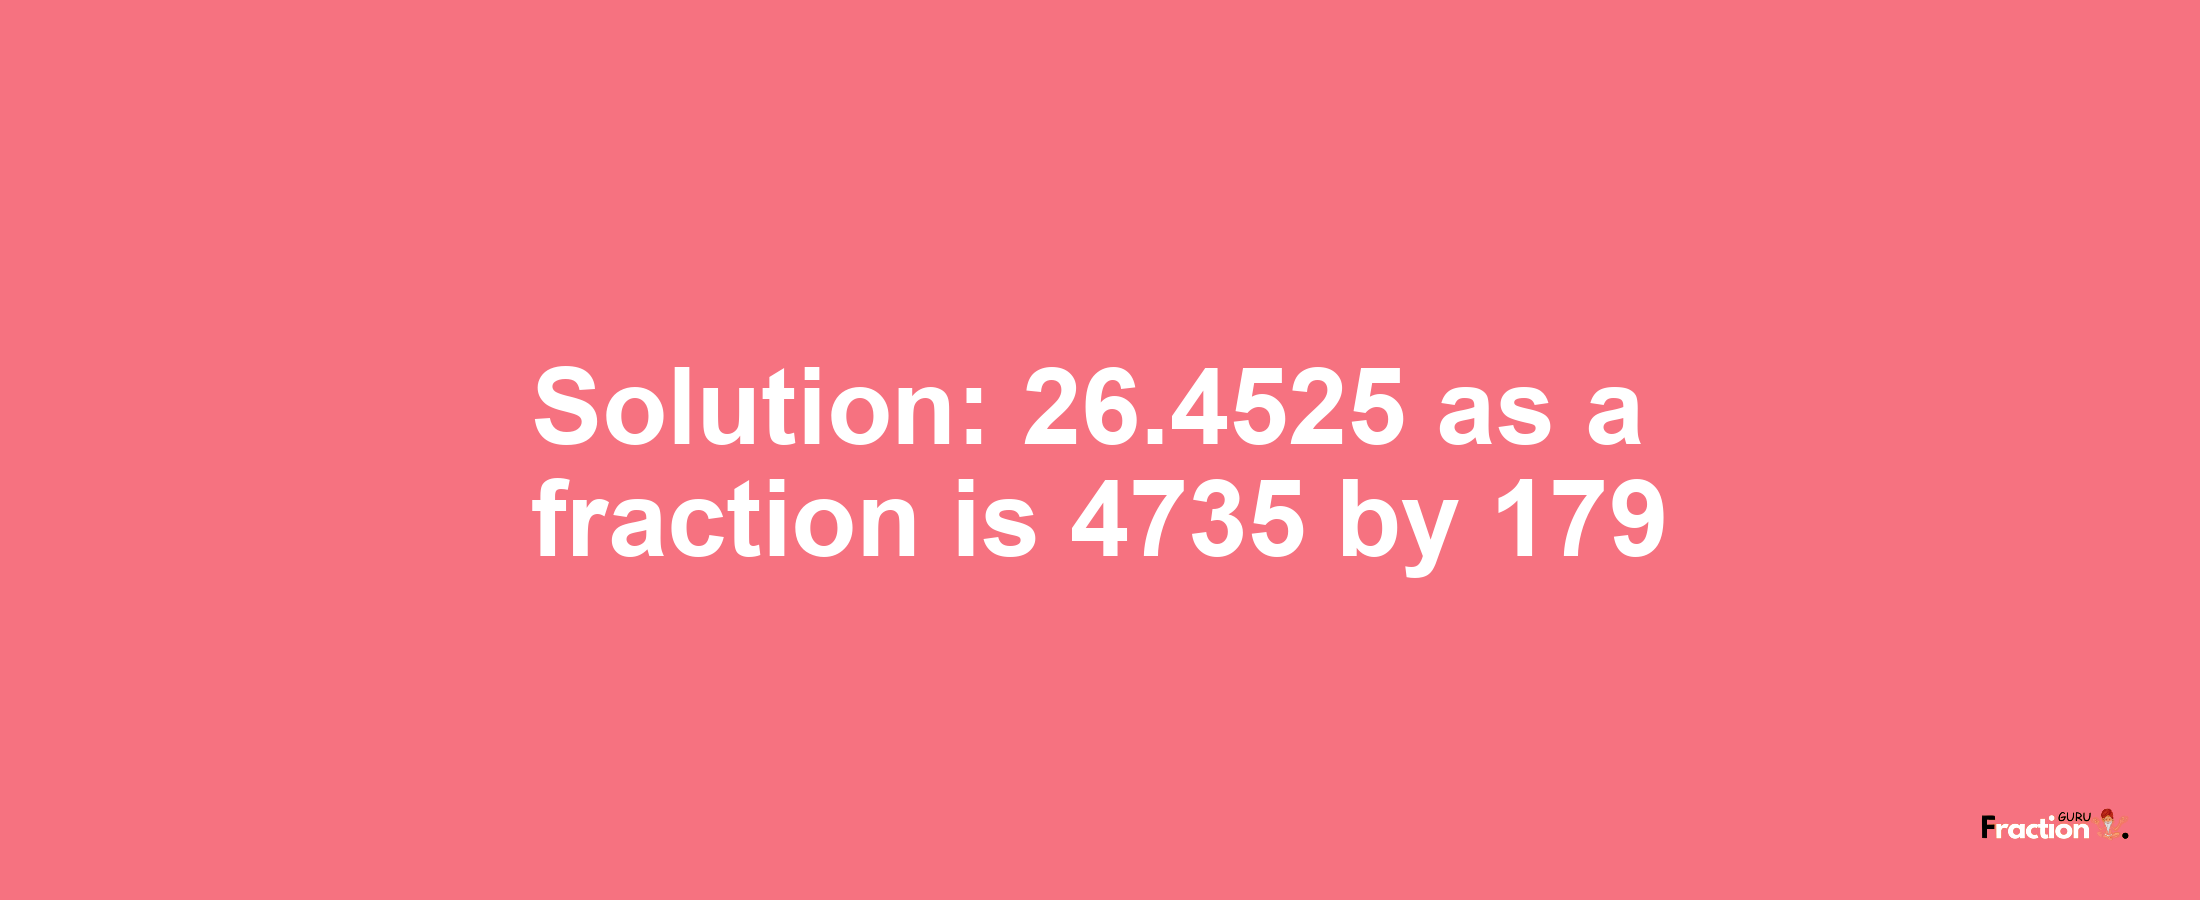 Solution:26.4525 as a fraction is 4735/179